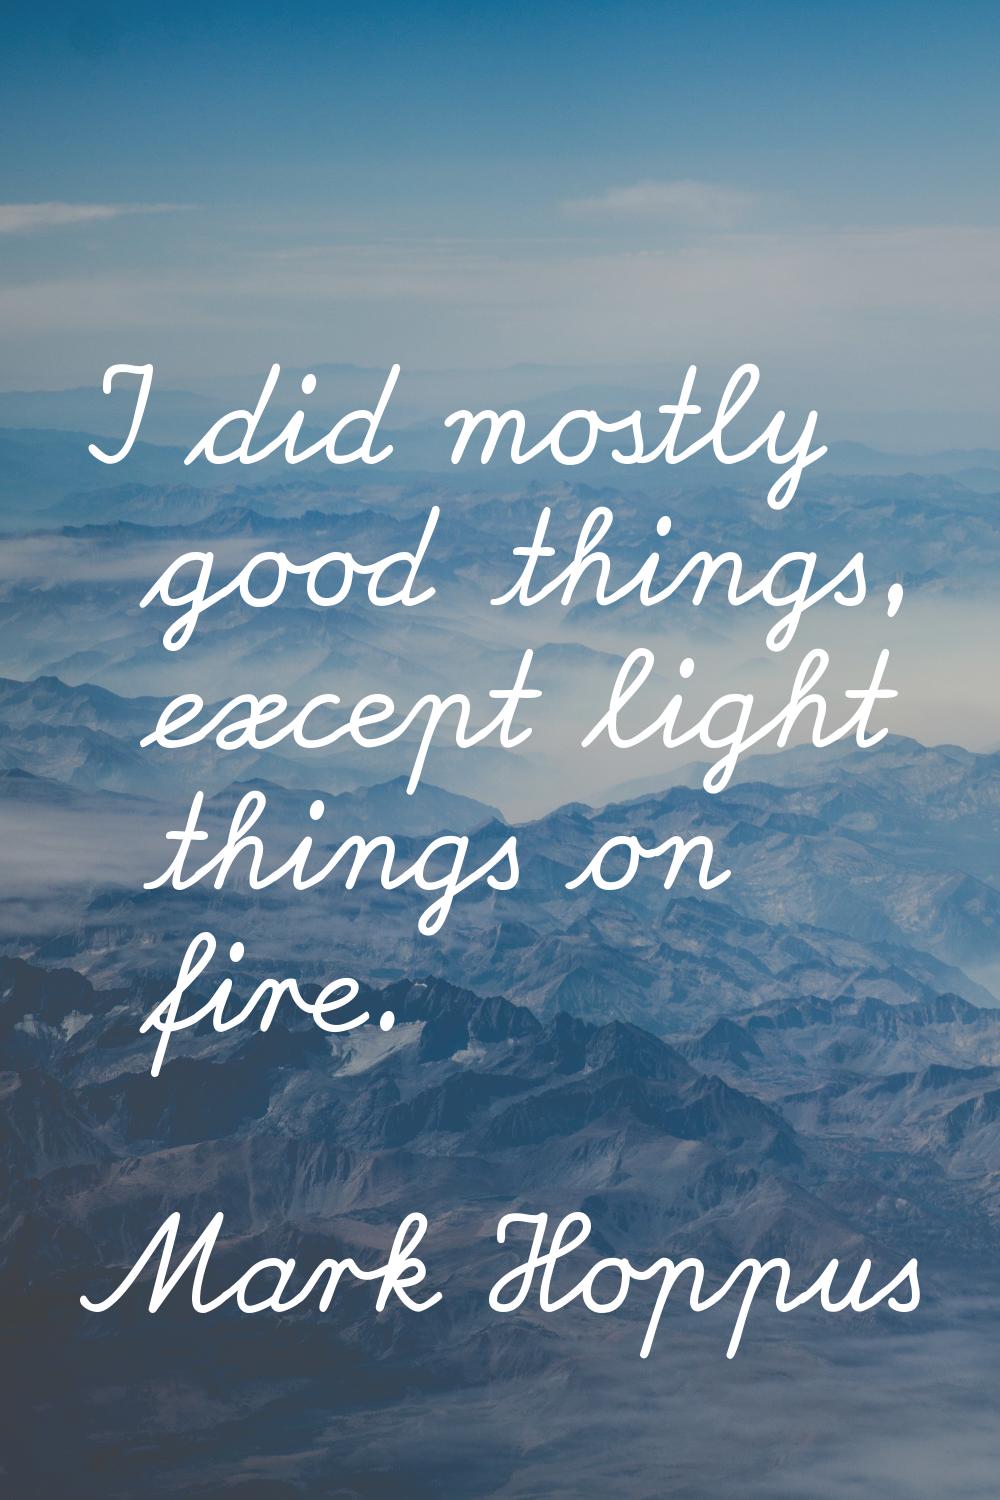 I did mostly good things, except light things on fire.